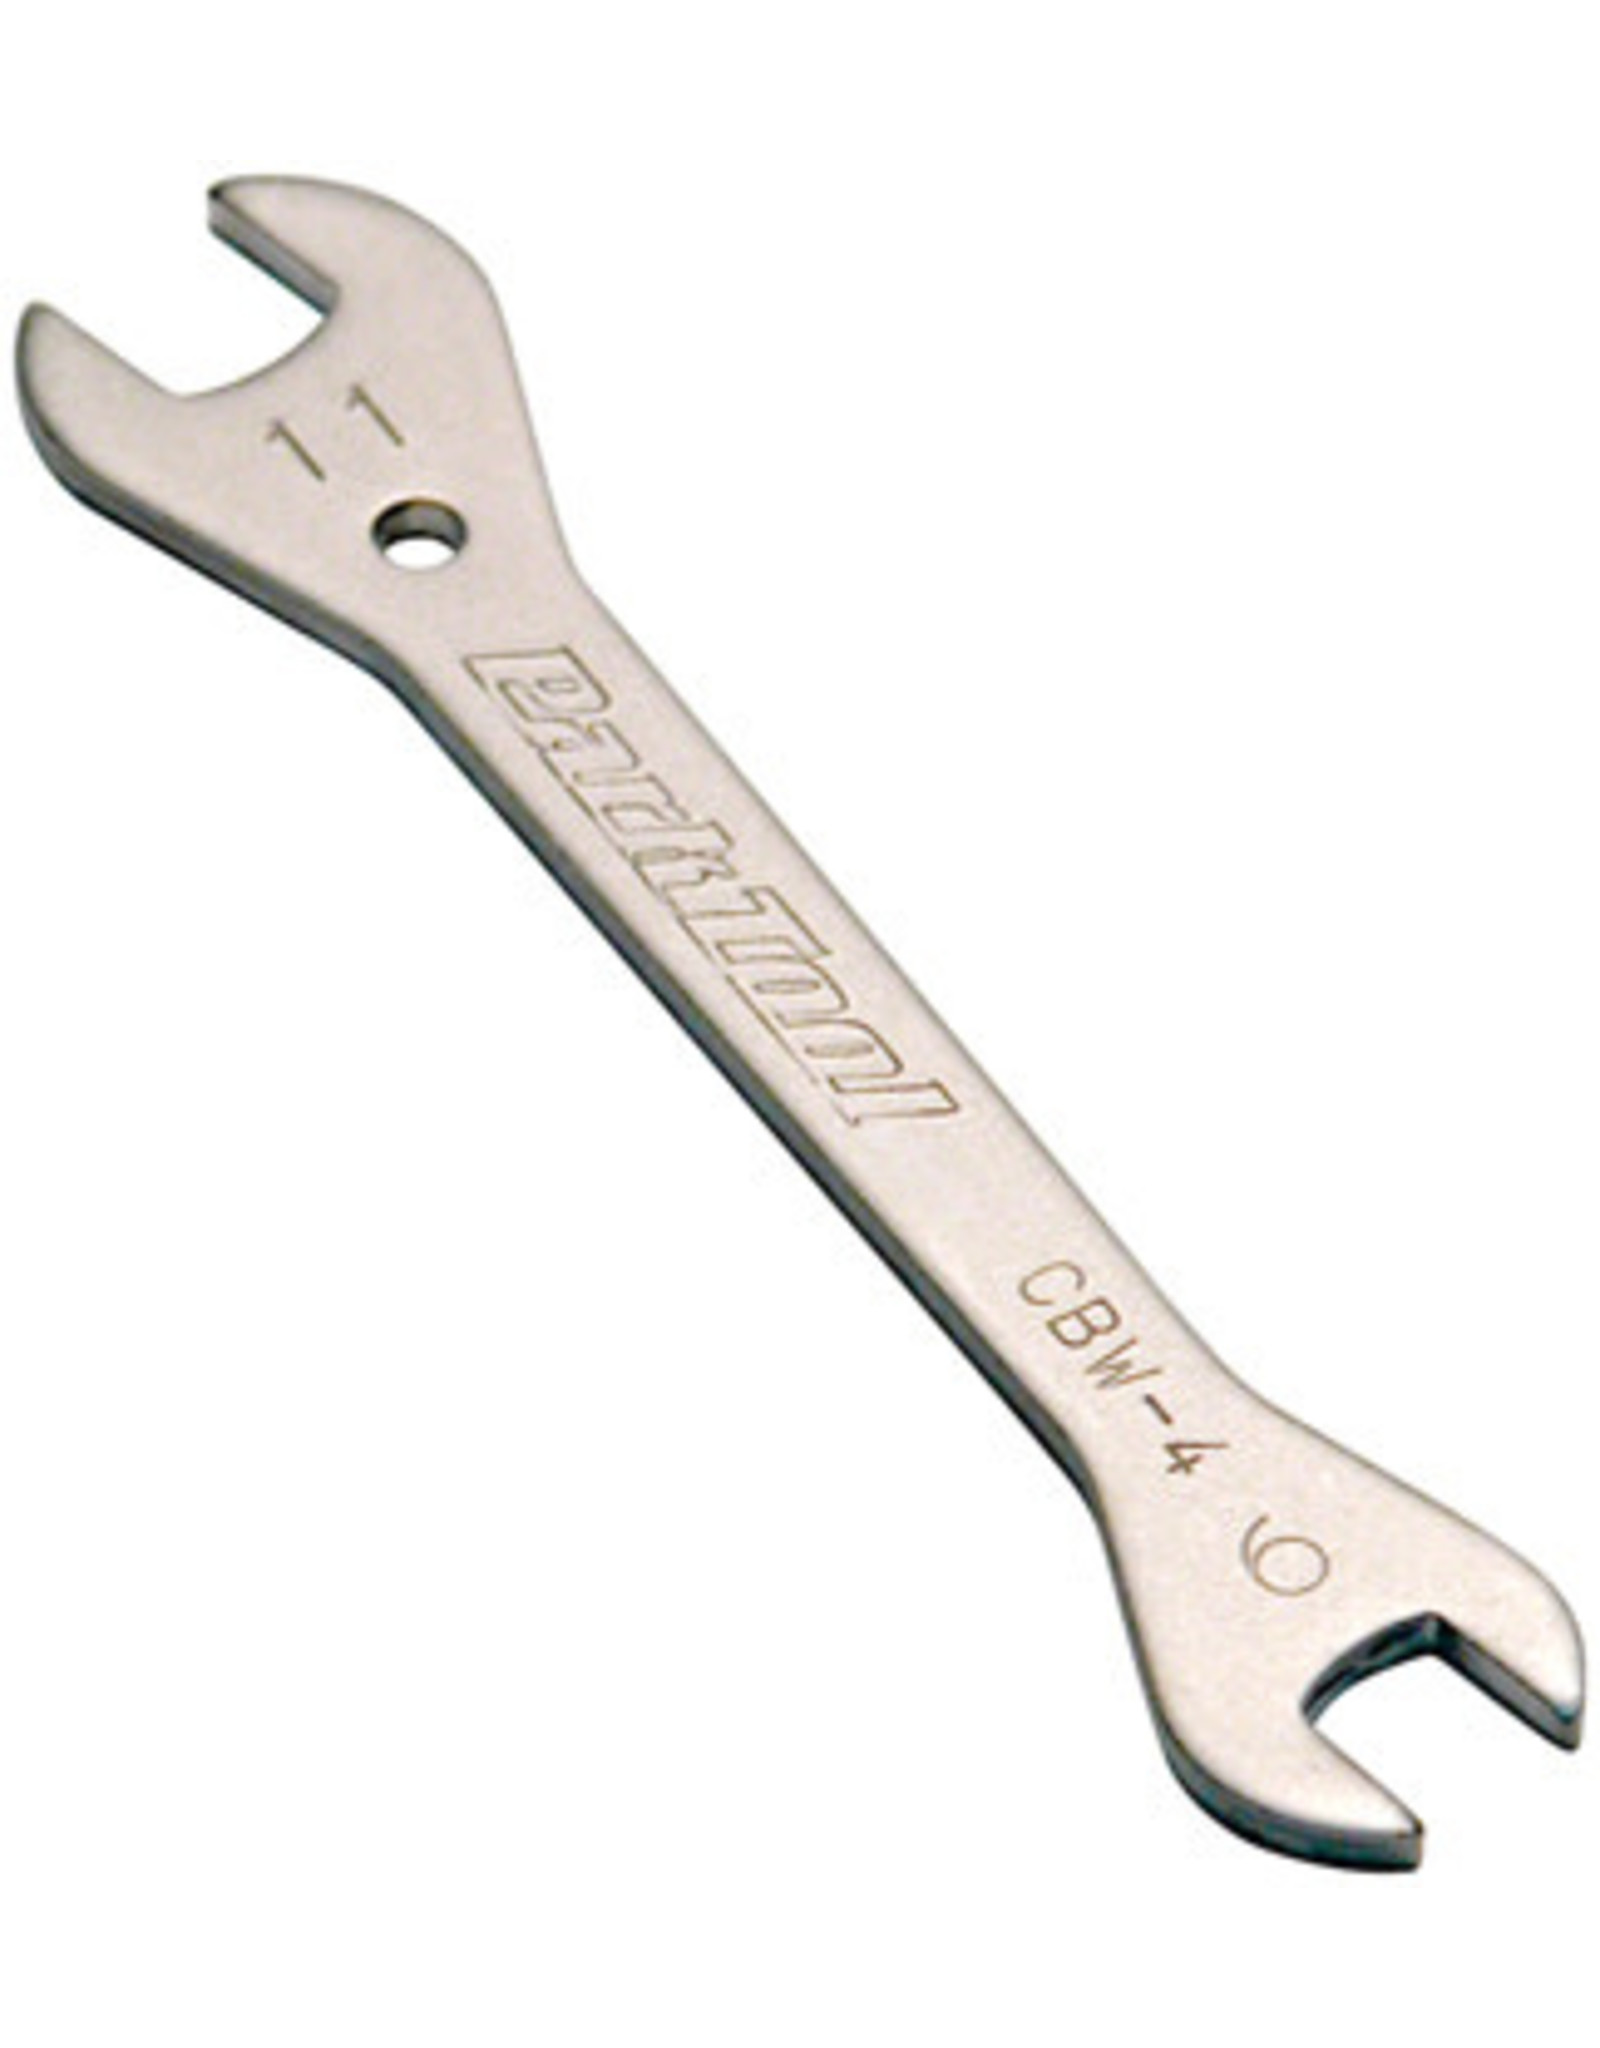 Park Tool Park Tool CBW-4 Open End Brake Wrench: 9.0 - 11.0mm